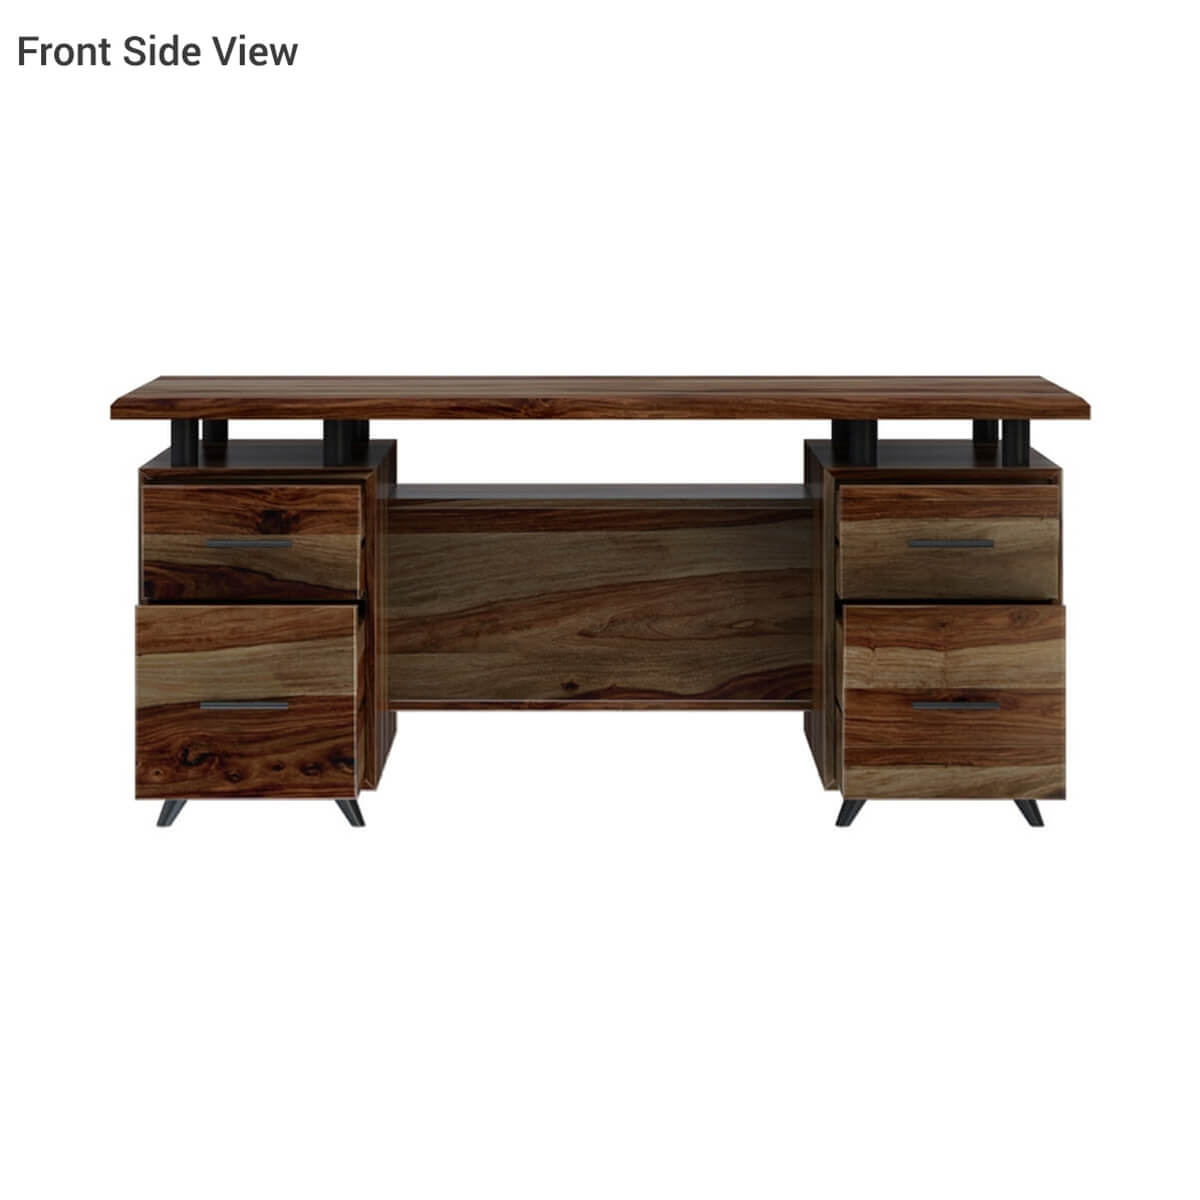 https://www.sierralivingconcepts.com/images/thumbs/0400080_hondah-solid-wood-70-inch-modern-dual-sided-storage-executive-desk.jpeg